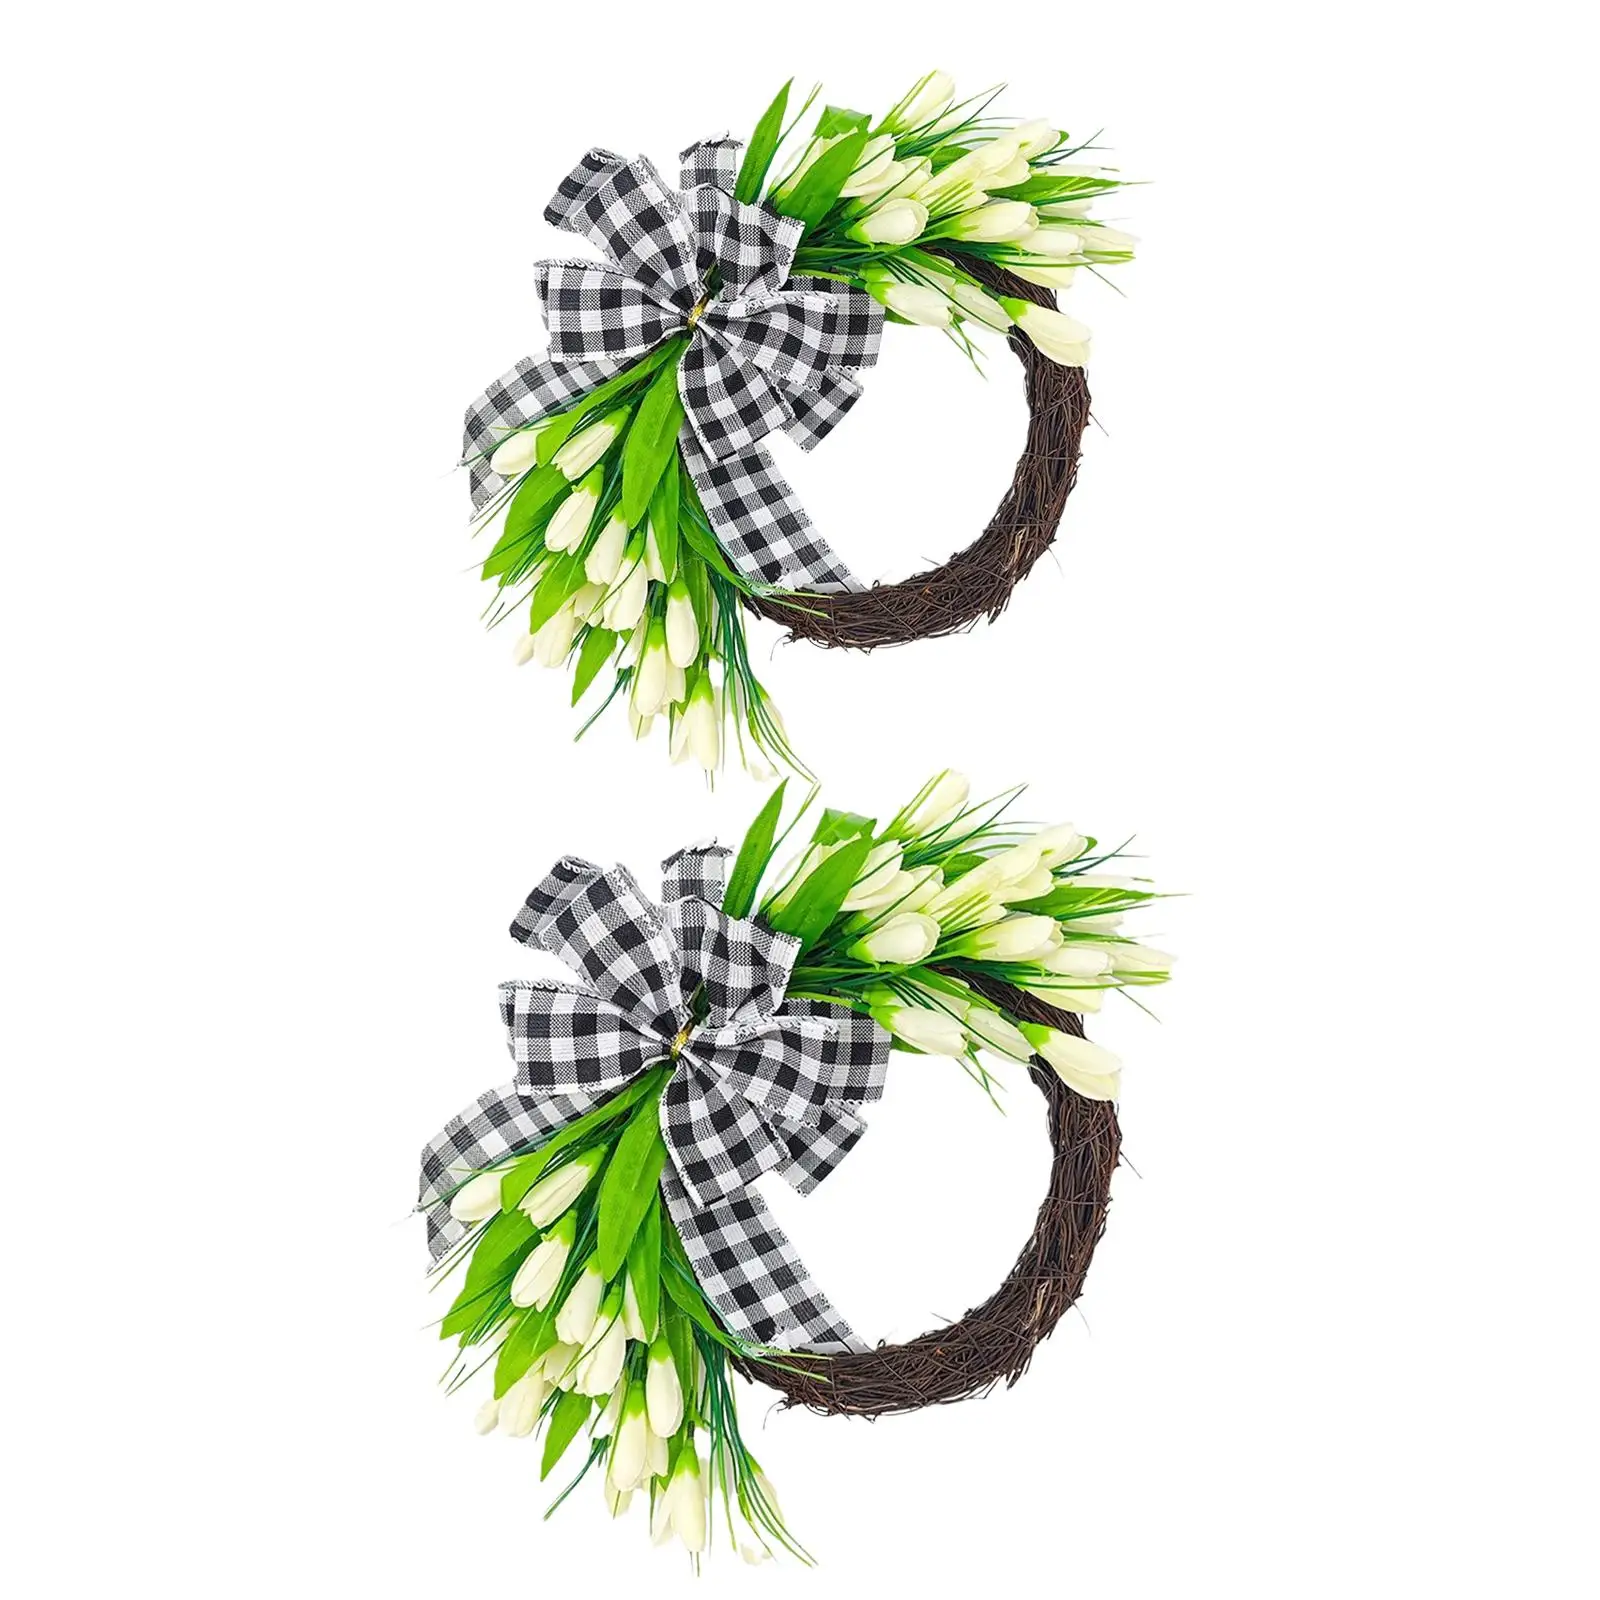 Artificial Flower Wreath Spring Wreath Rustic Green Leaves Round Floral Wreath Hanging Wreath for Window Holiday Garden